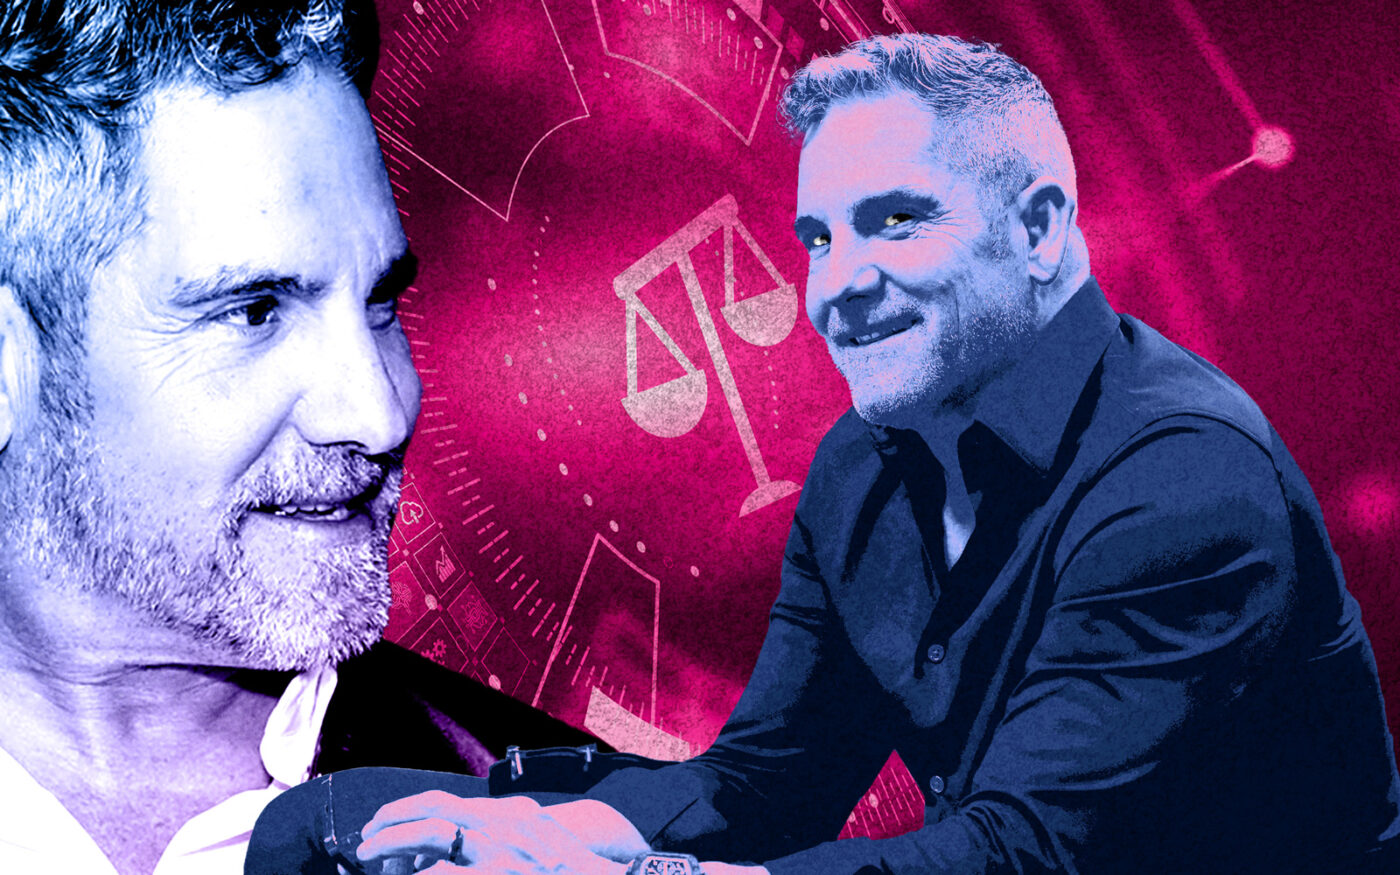 Grant Cardone Class Action Lawsuit Gets Tossed Out